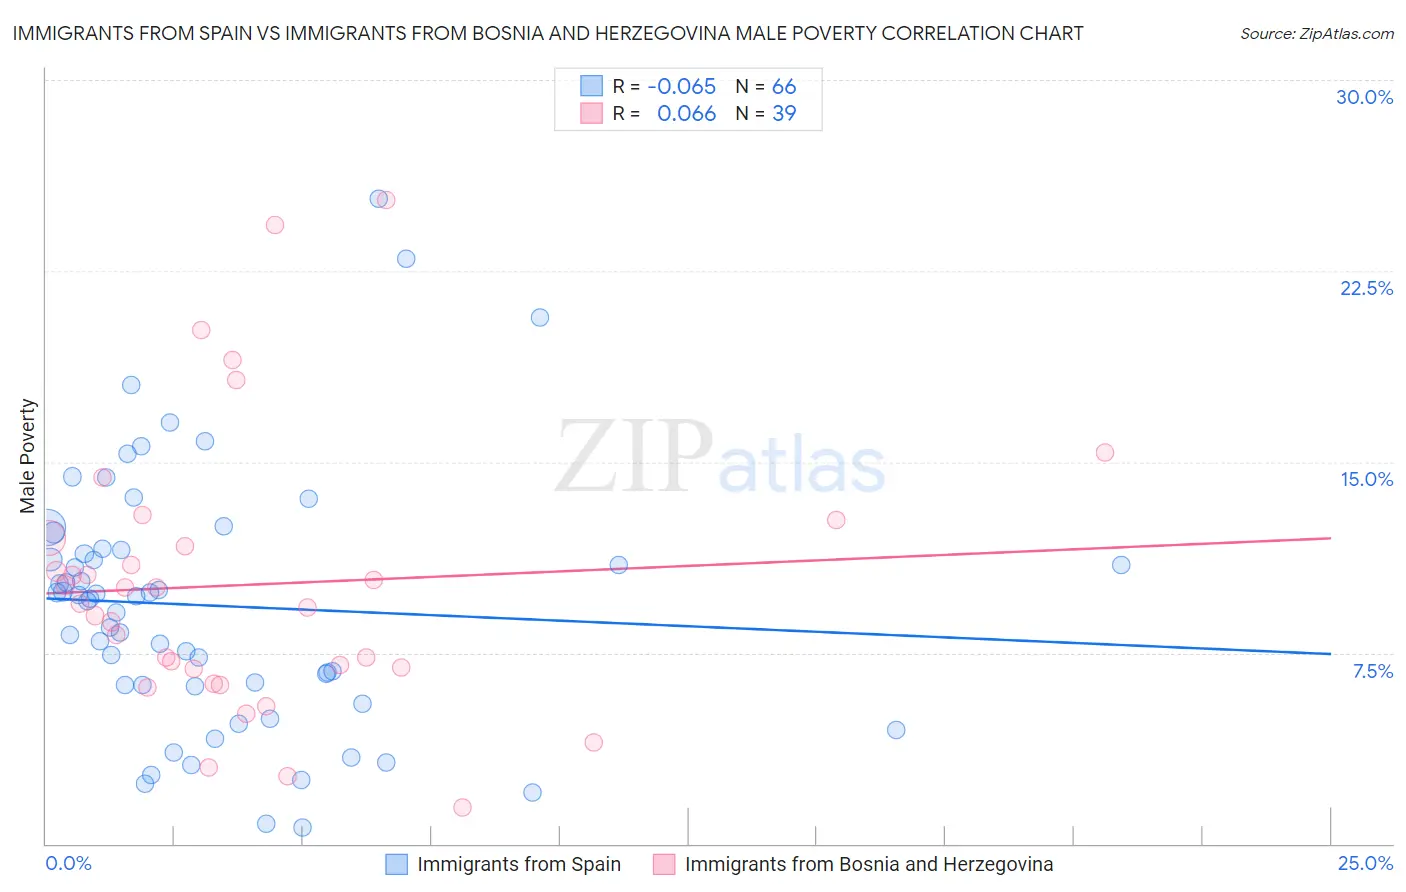 Immigrants from Spain vs Immigrants from Bosnia and Herzegovina Male Poverty